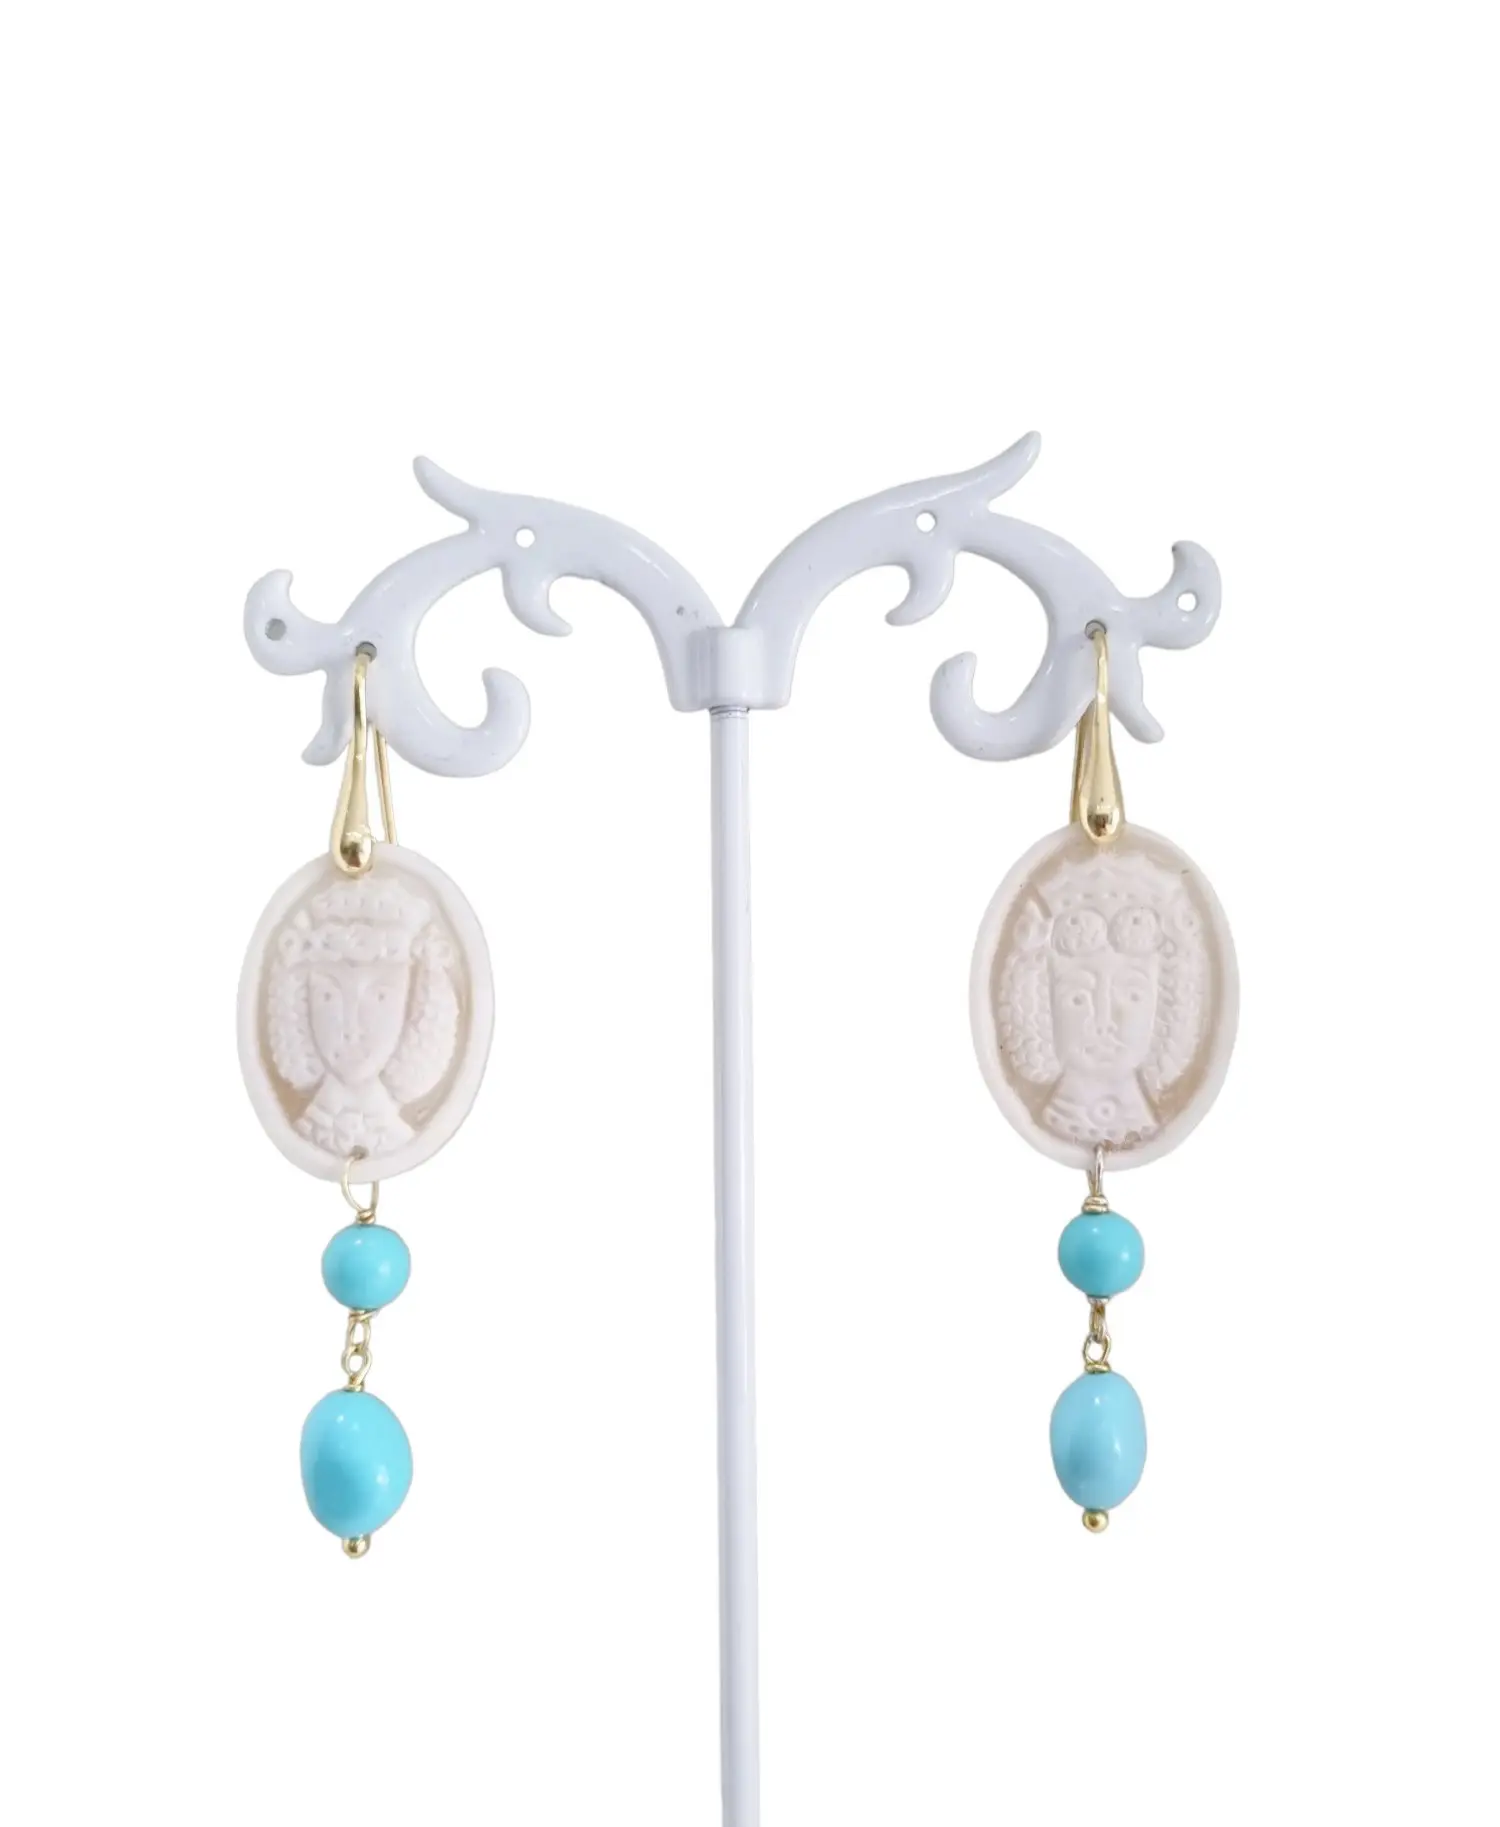 Earrings made with cameos depicting dark brown heads, gold-plated 925 silver earrings and turquoise paste. Length 6cm Weight 2.7g